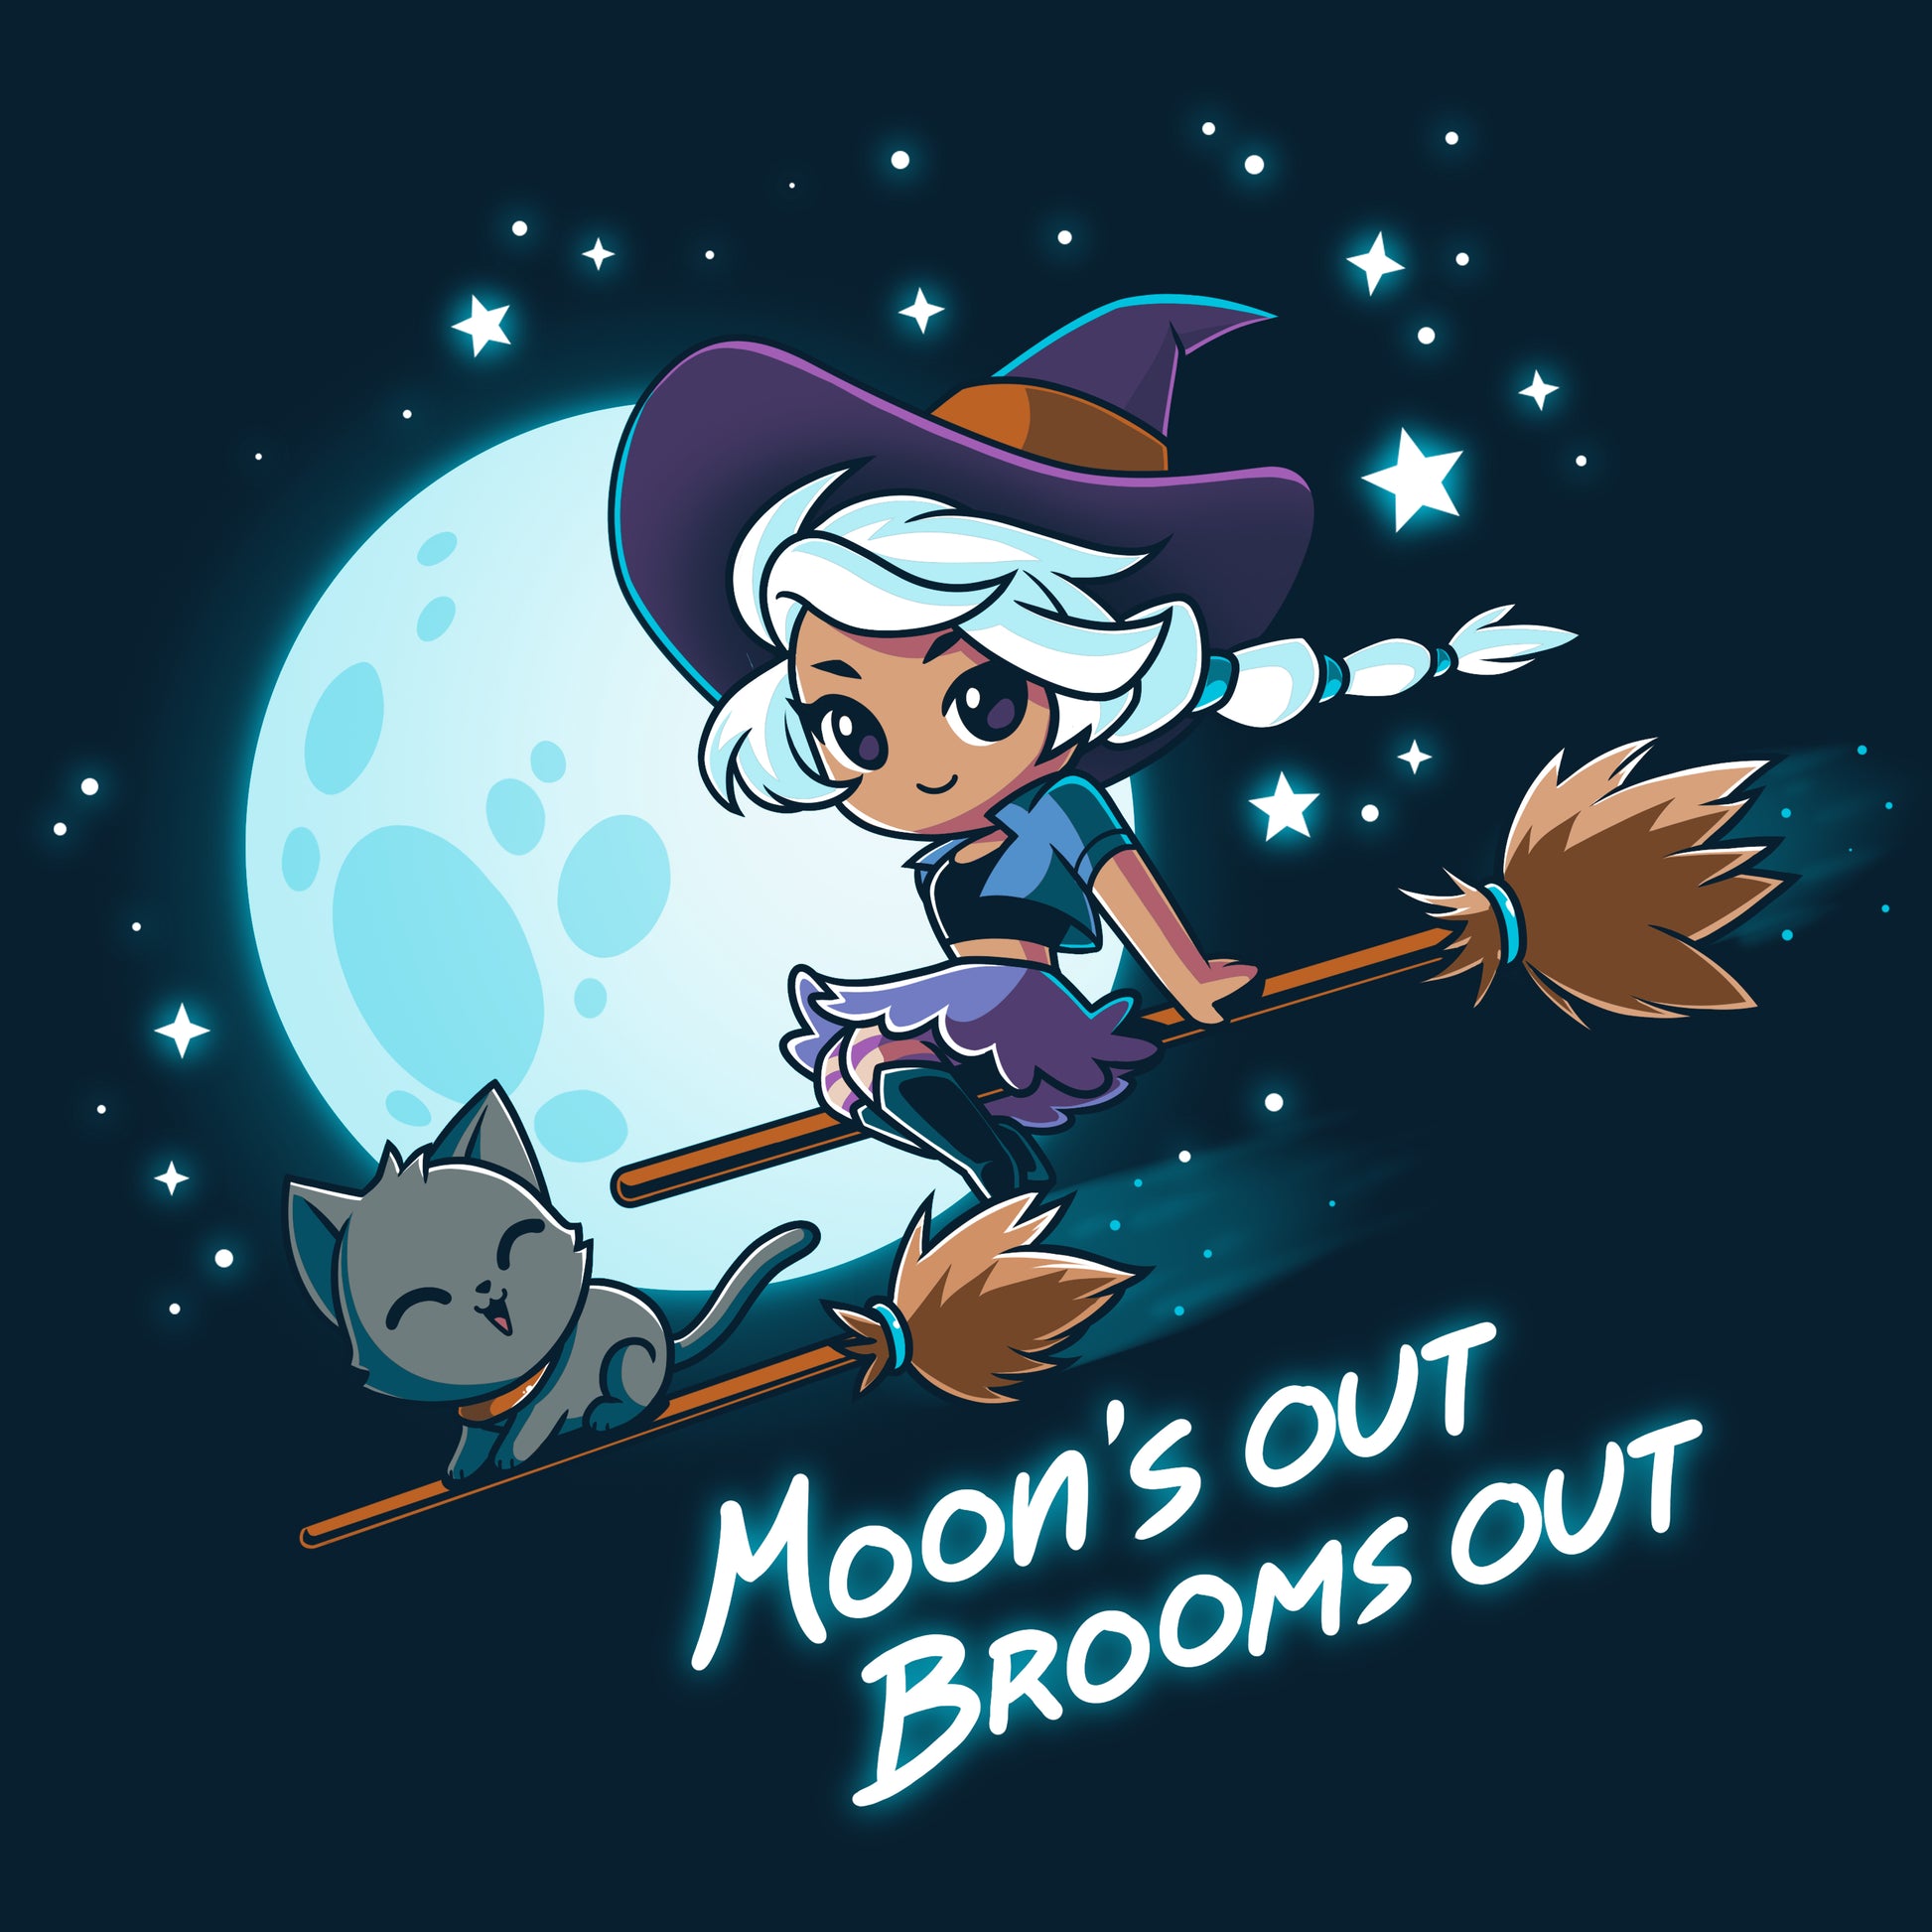 Moon's out, TeeTurtle Moon’s Out Brooms Out t-shirt.